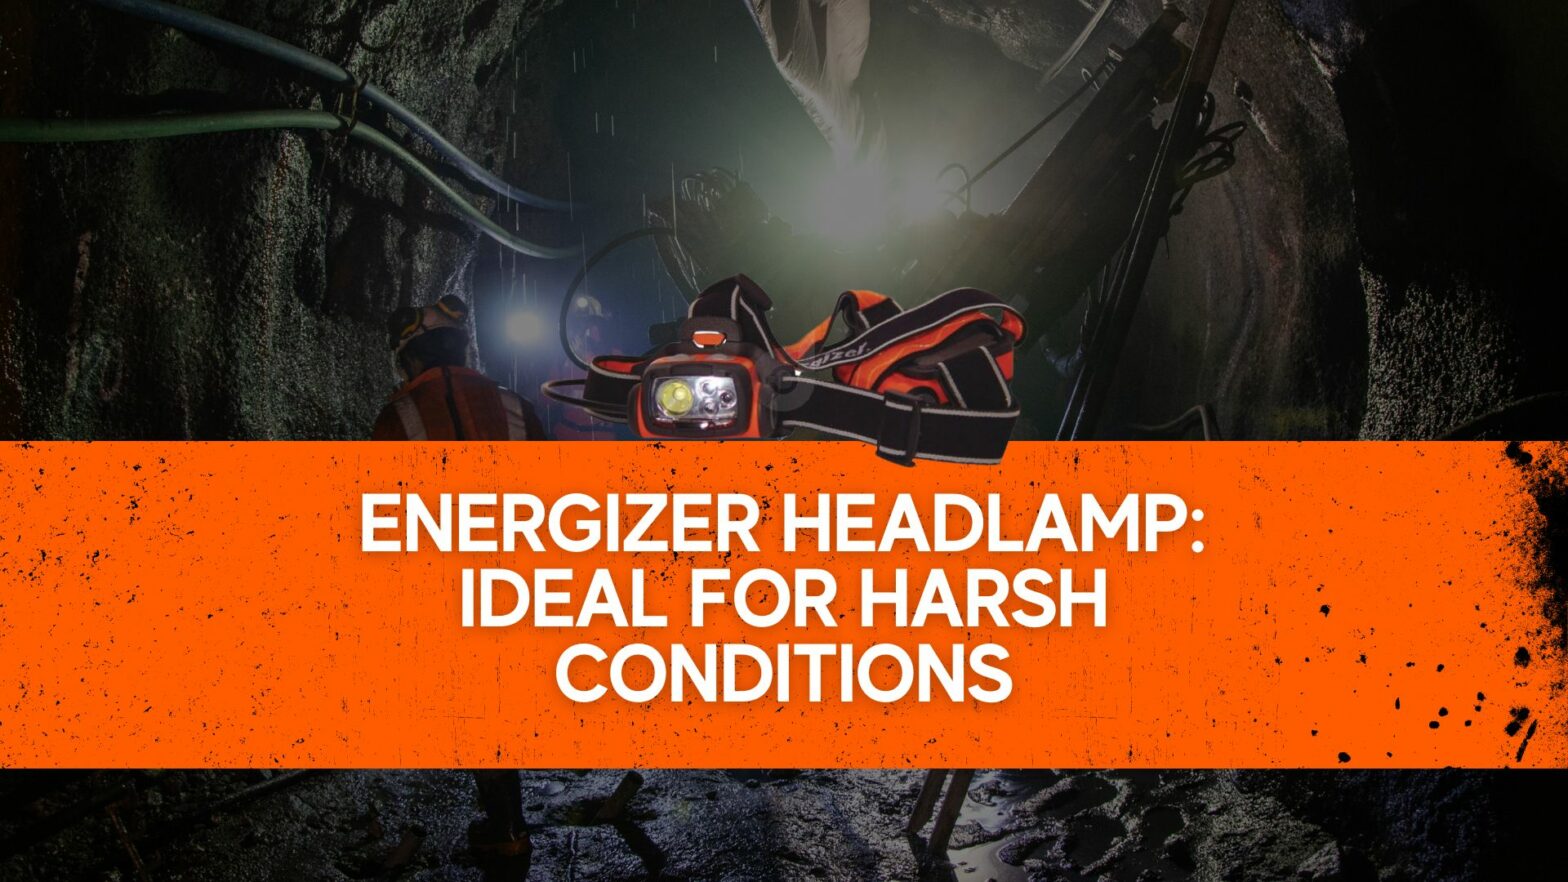 Energizer Headlamp Ideal for Harsh conditions